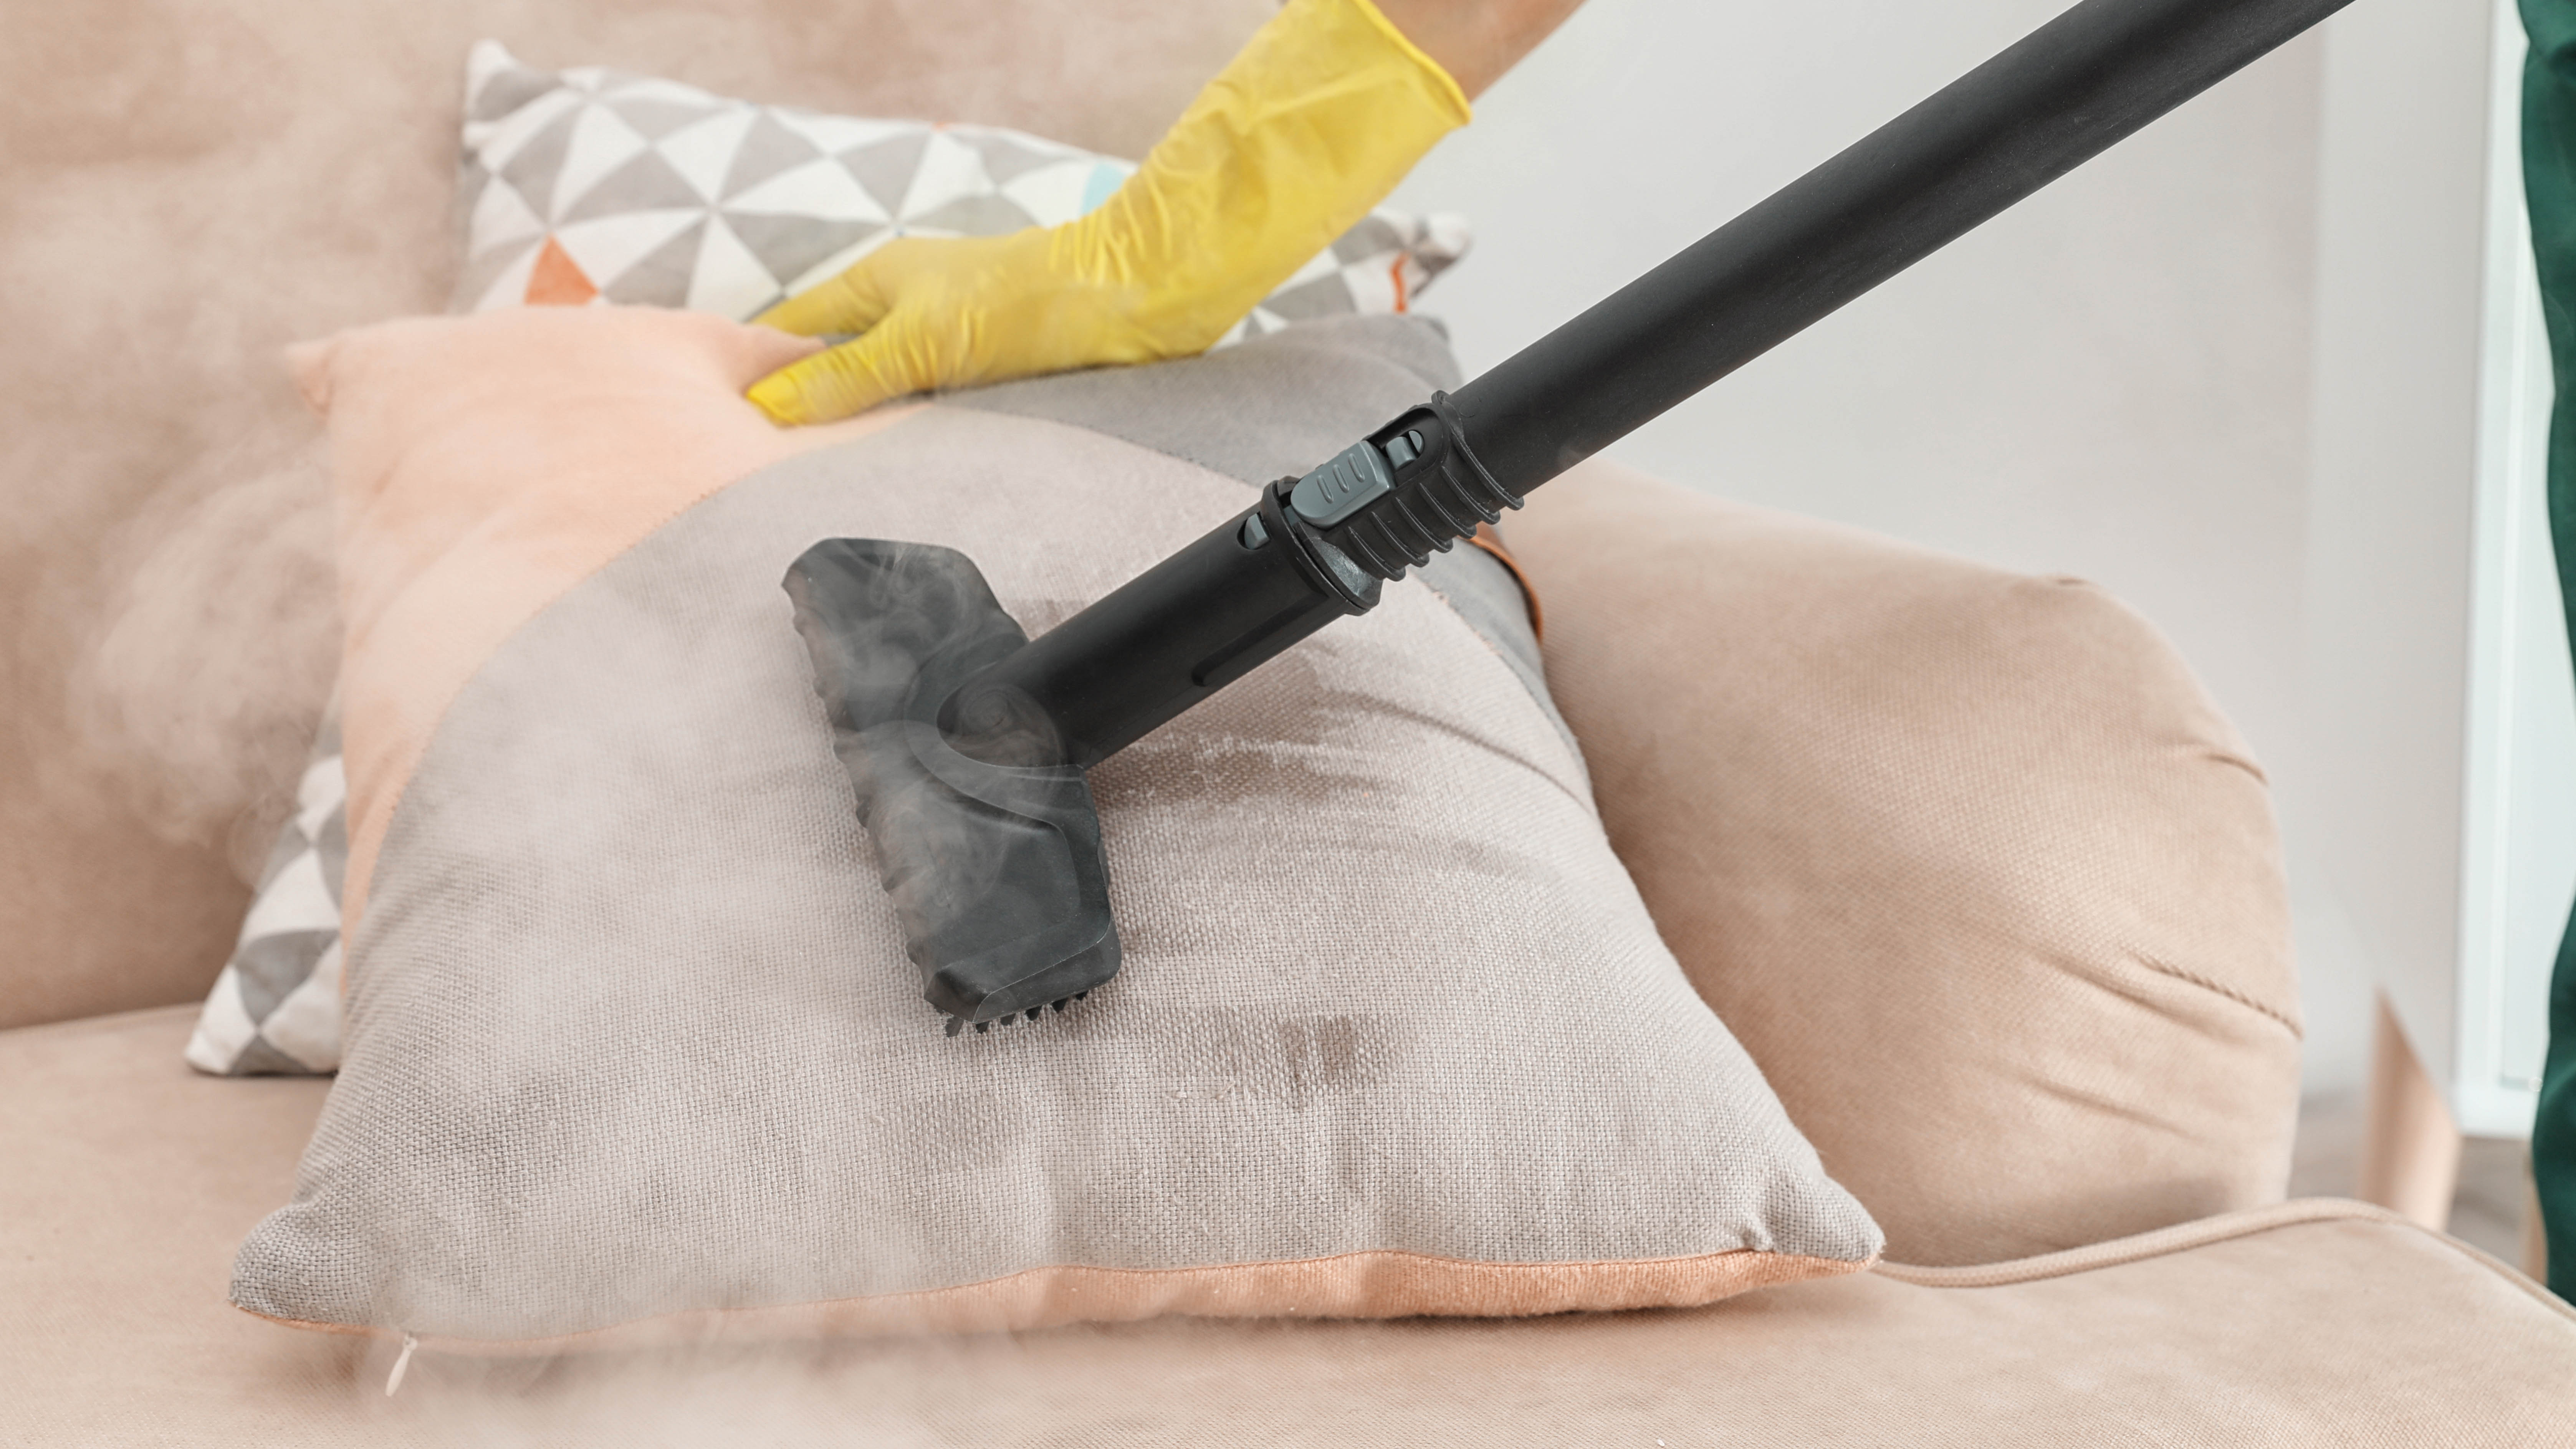 Someone using a steam cleaner on a couch cushion